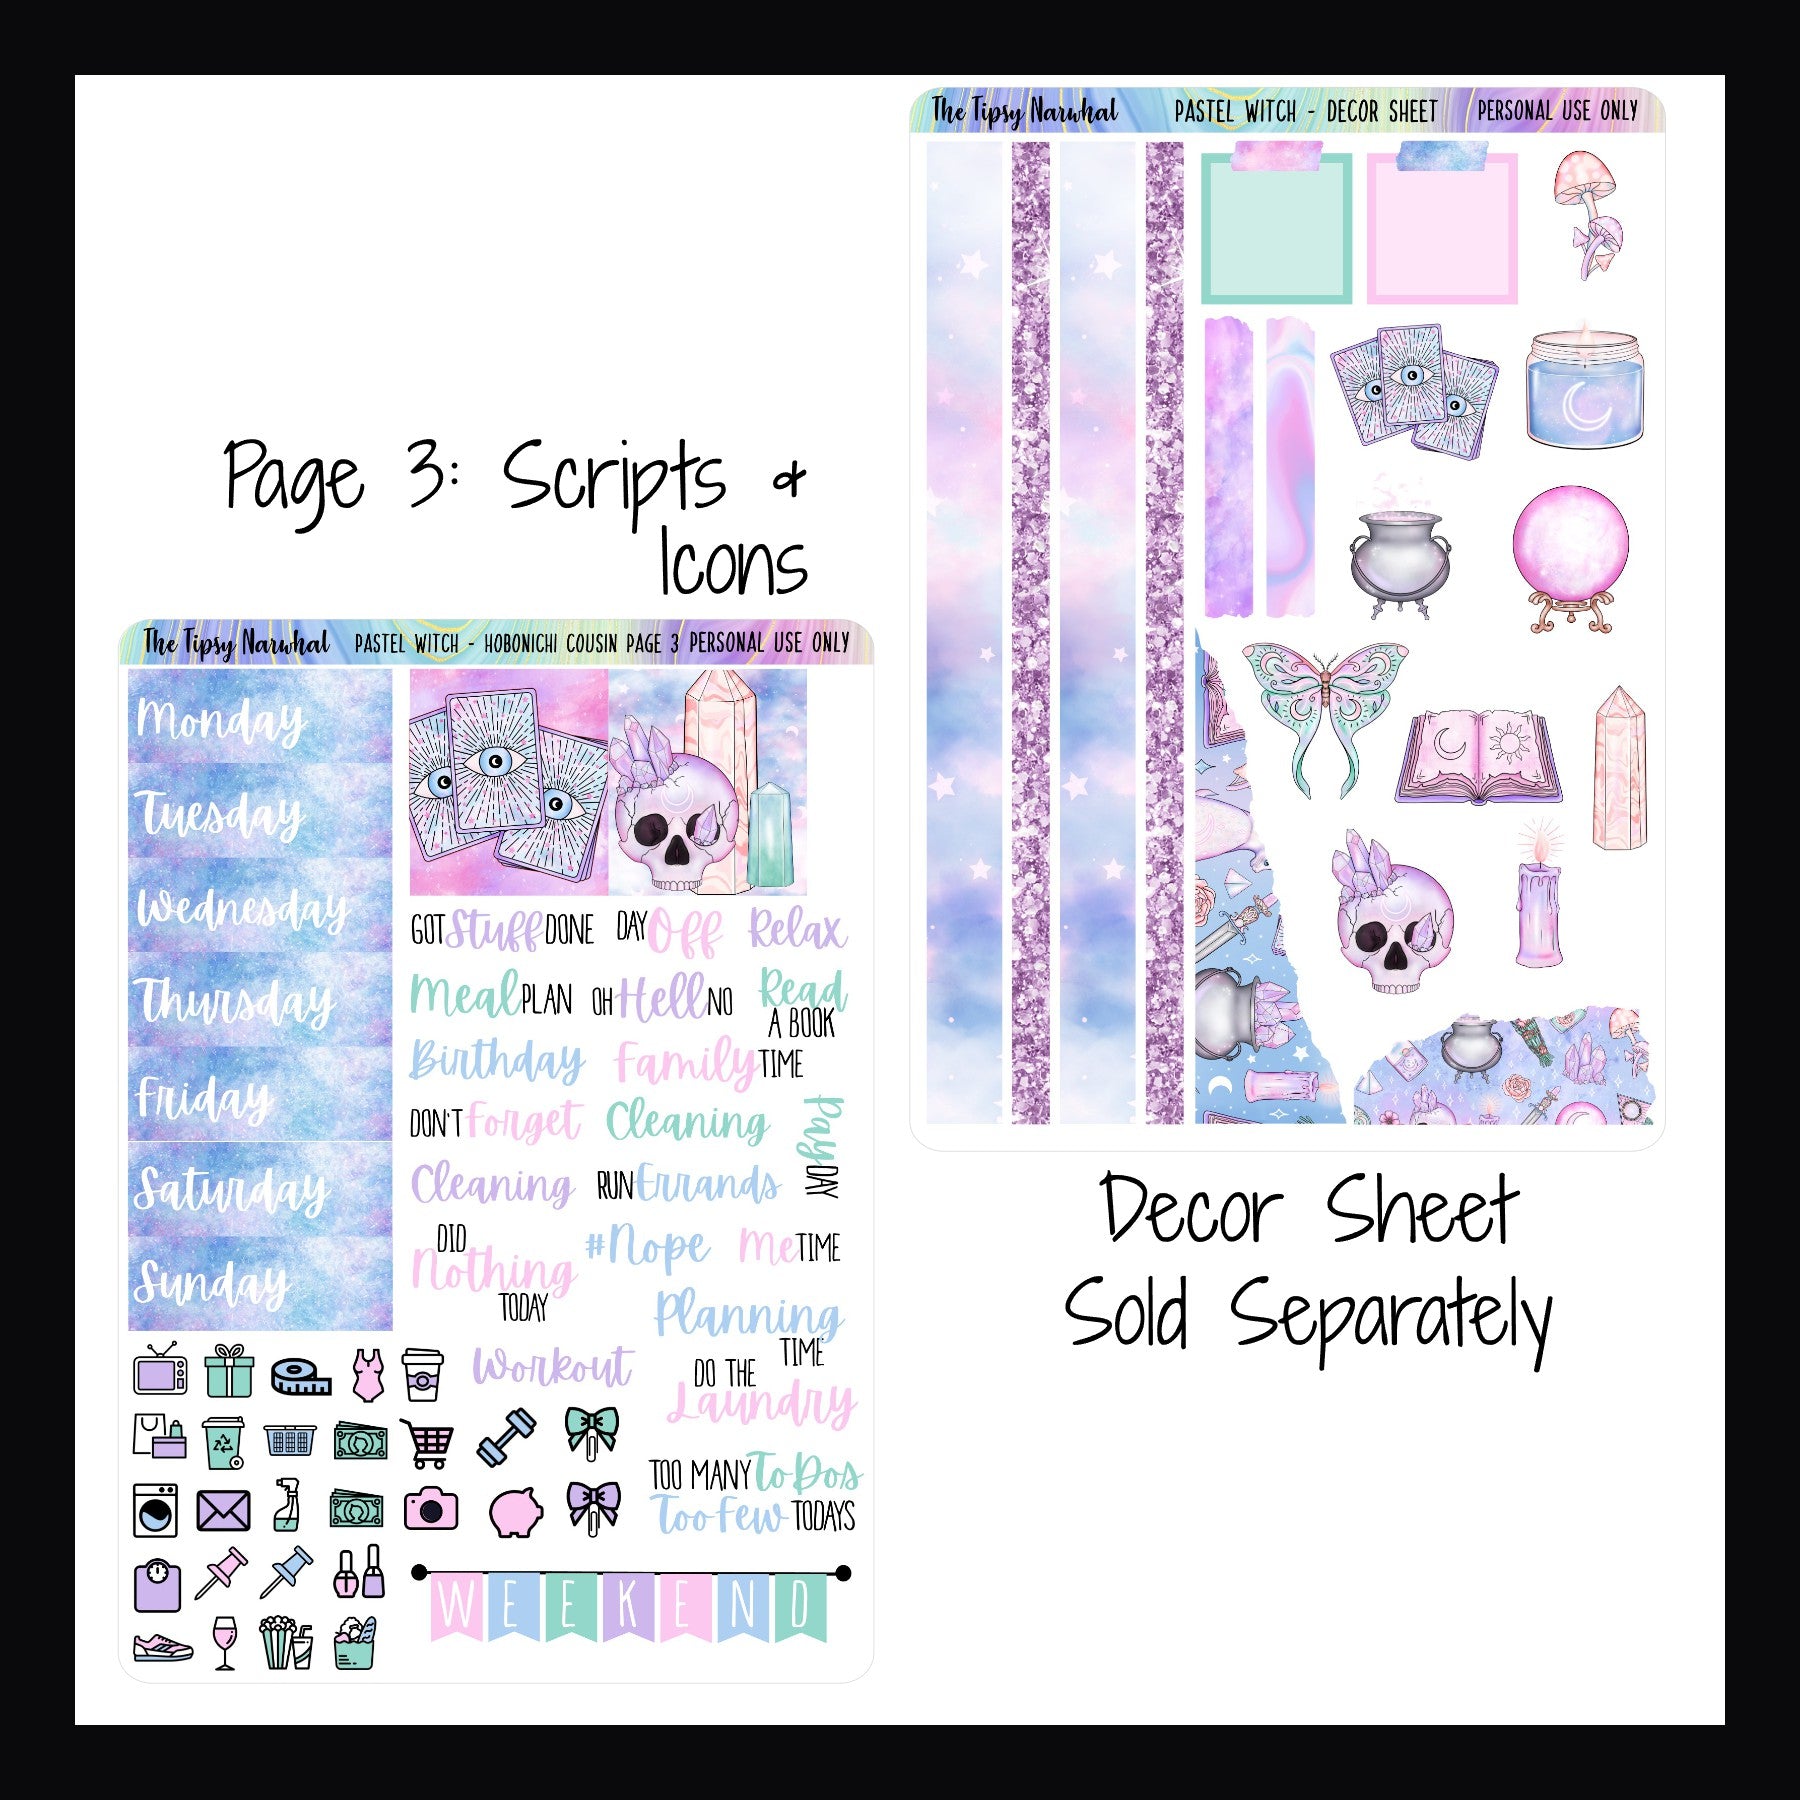 Digital Pastel Witch Hobonichi Cousin page 3 features additional date covers, full box decor, script stickers, daily icons and a weekend banner.  There is a matching decor sheet available separately.